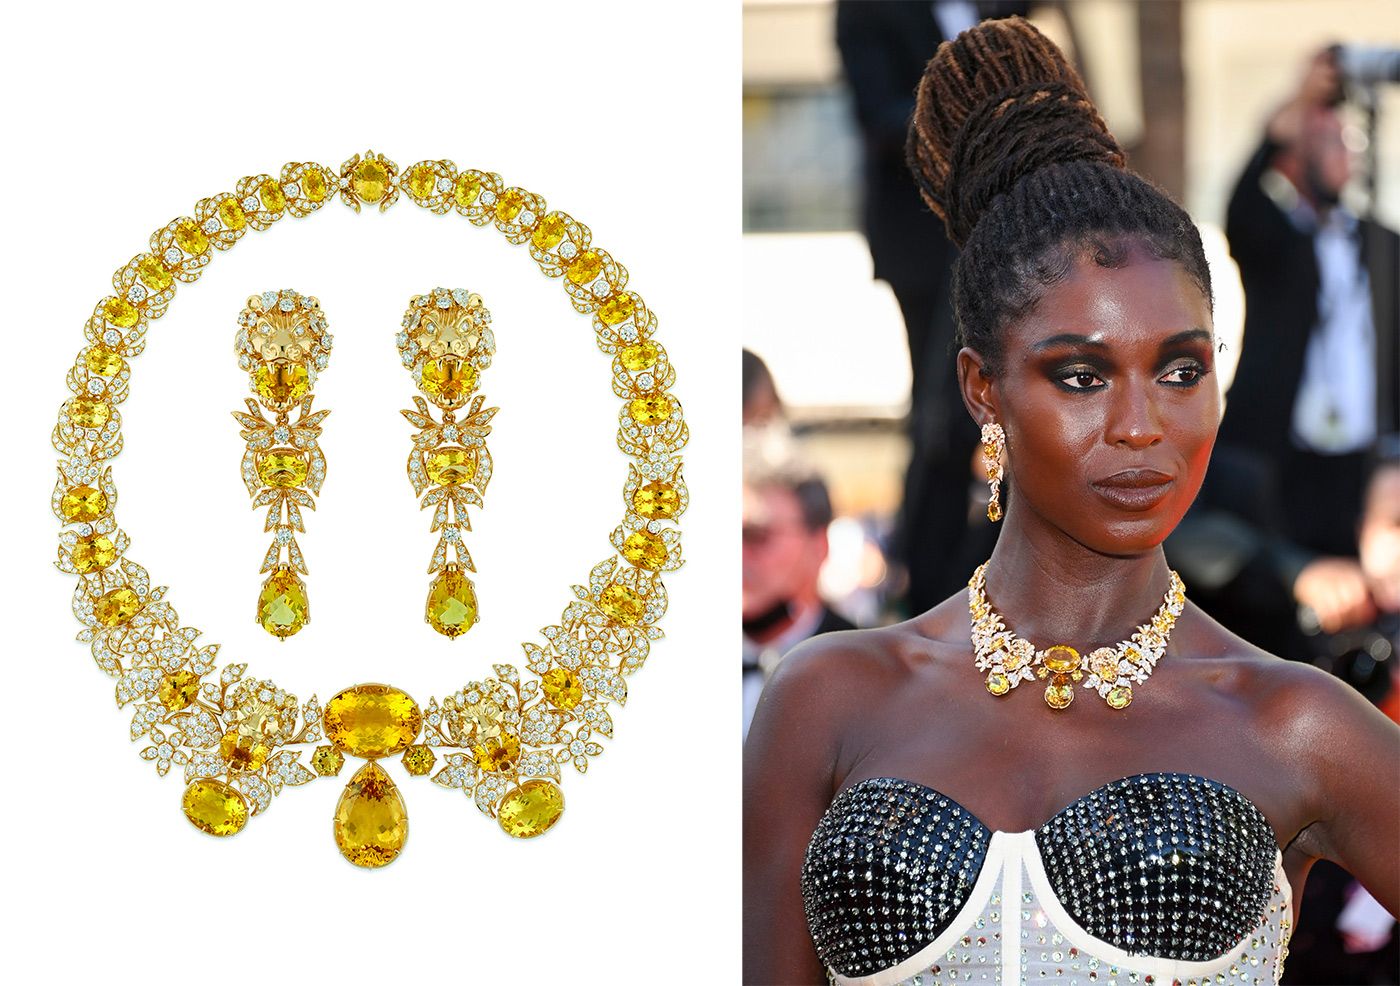 Actress Jodie Turner-Smith wore Gucci High Jewellery with yellow beryl and diamonds to the Cannes Film Festival 2021